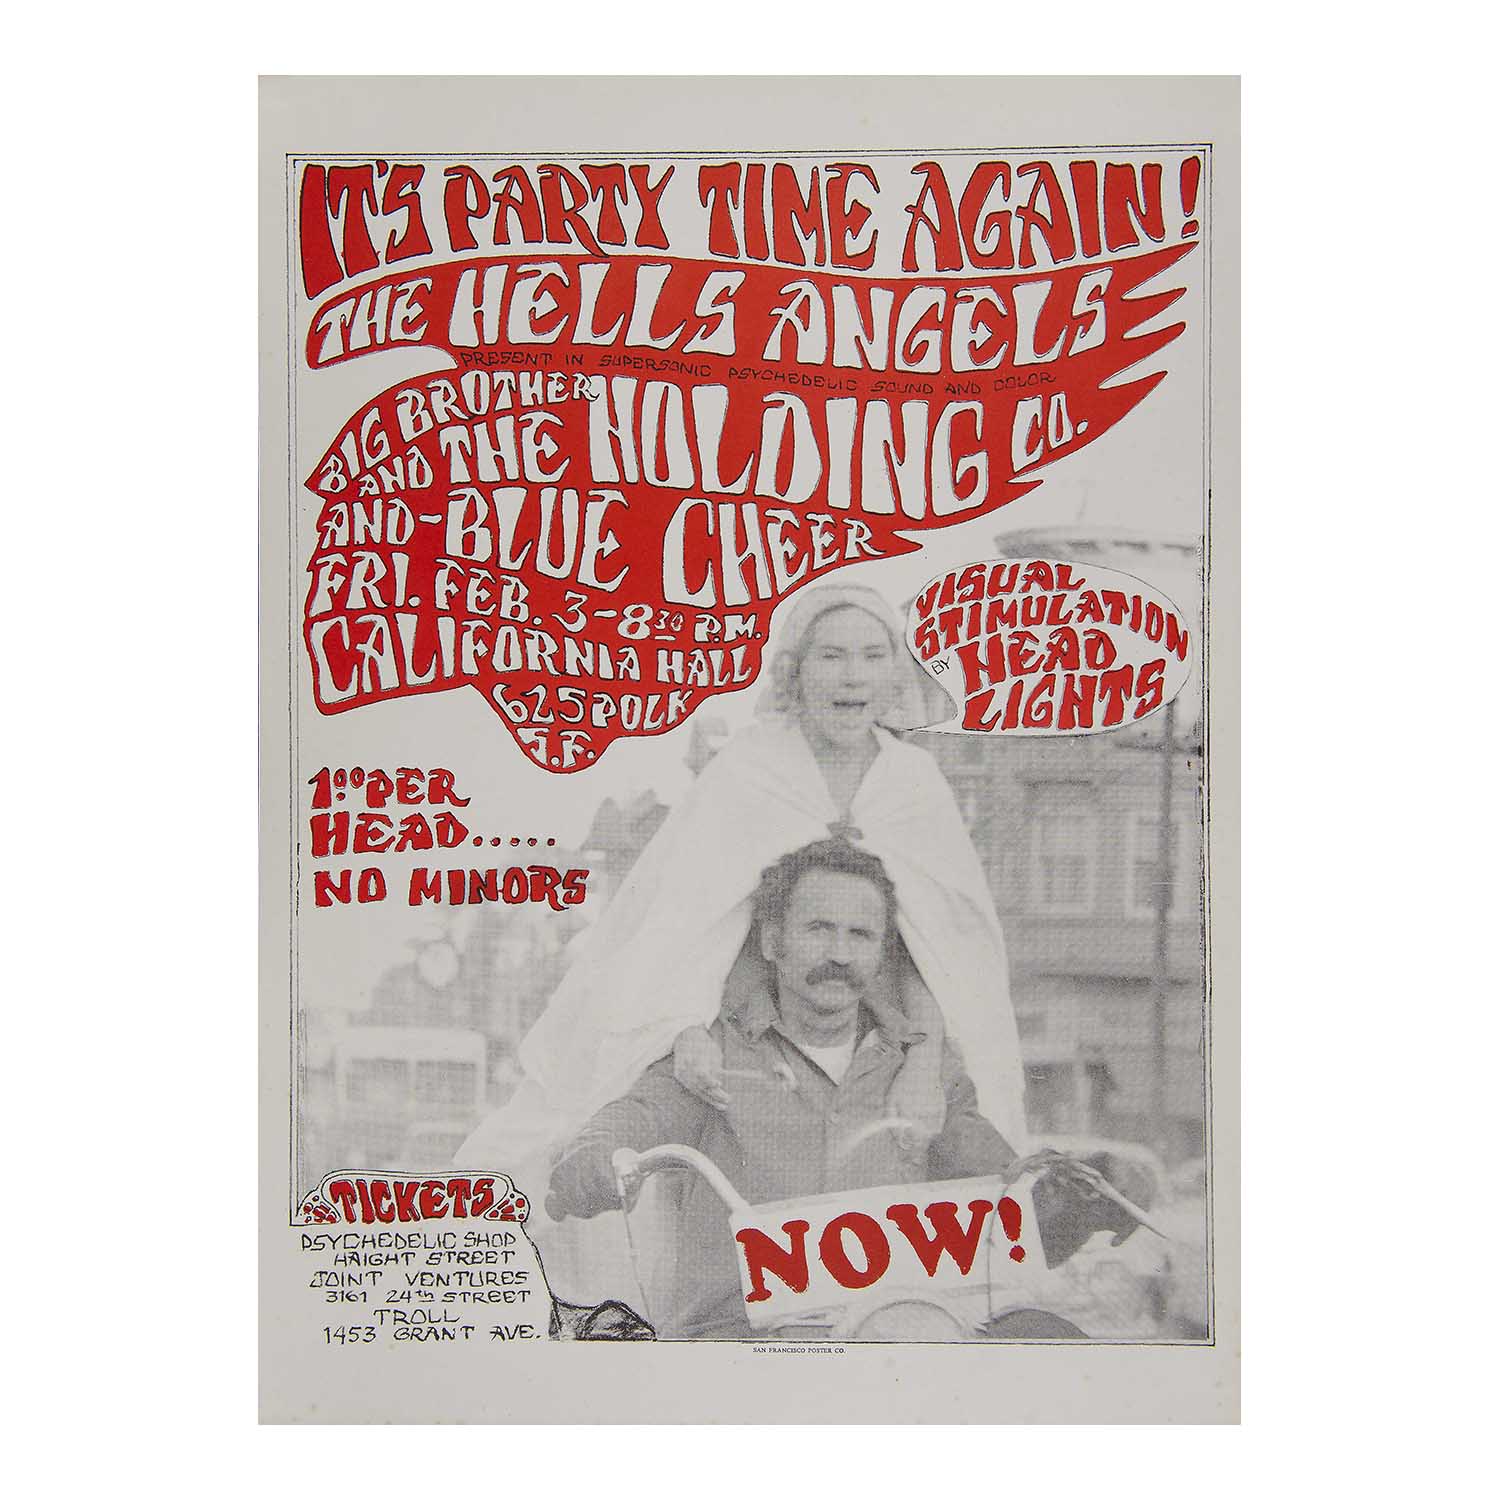 The Hells Angels present Big Brother and the Holding Company